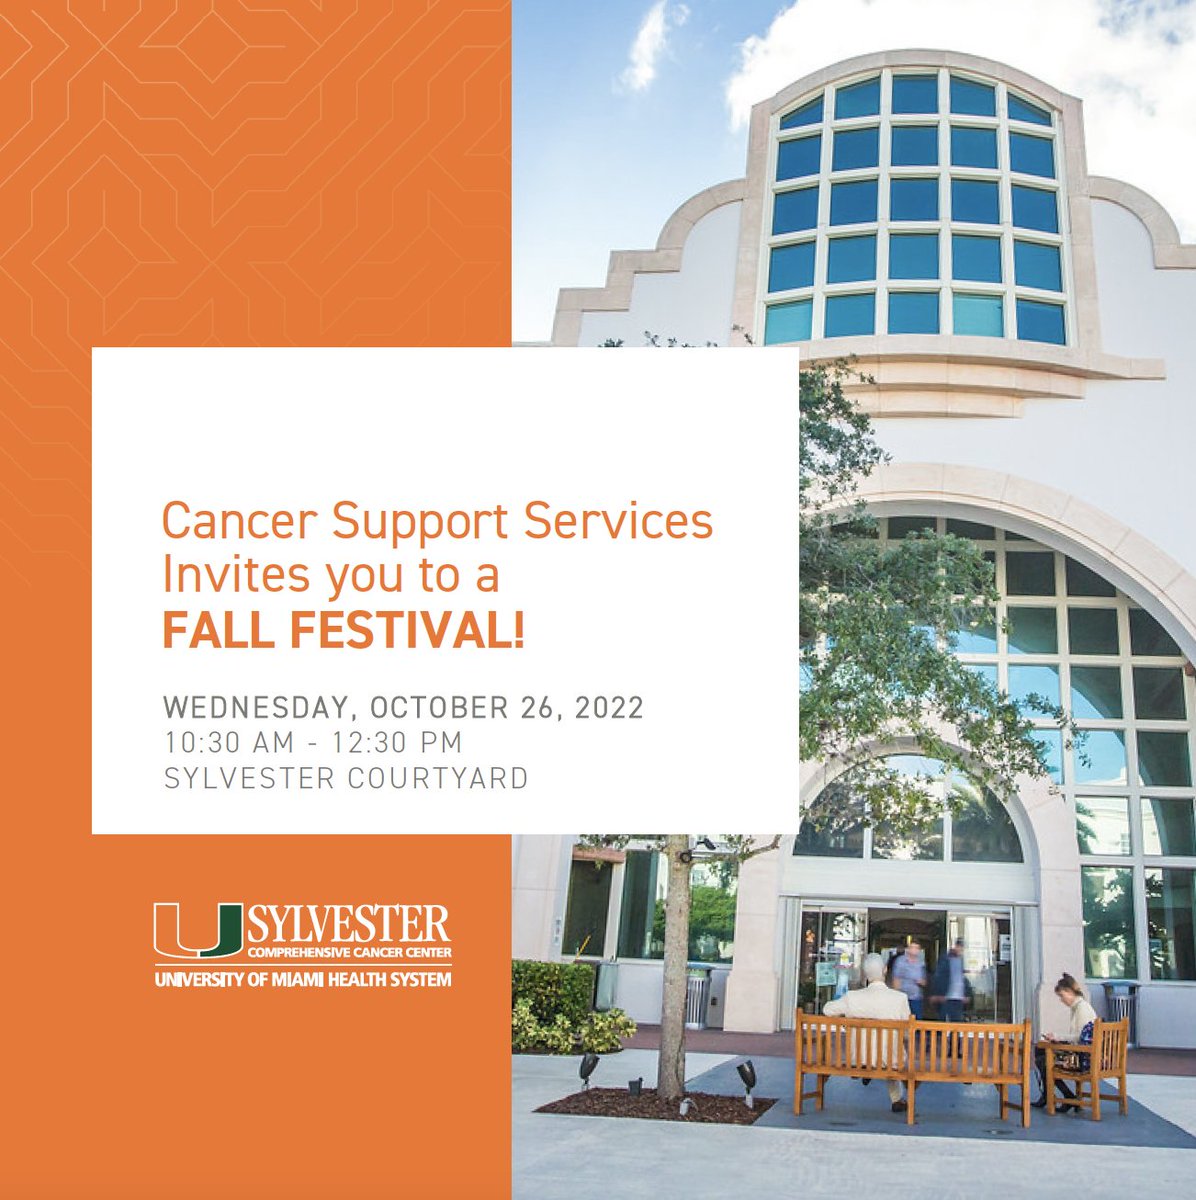 Join our #Cancer Support Services team for their #Fall Festival! 🎃 This event is open to everyone and will include: 🍂 Live #music 🍂 Interactive #art therapy 🍂 Nutrition activities We look forward to seeing you there!